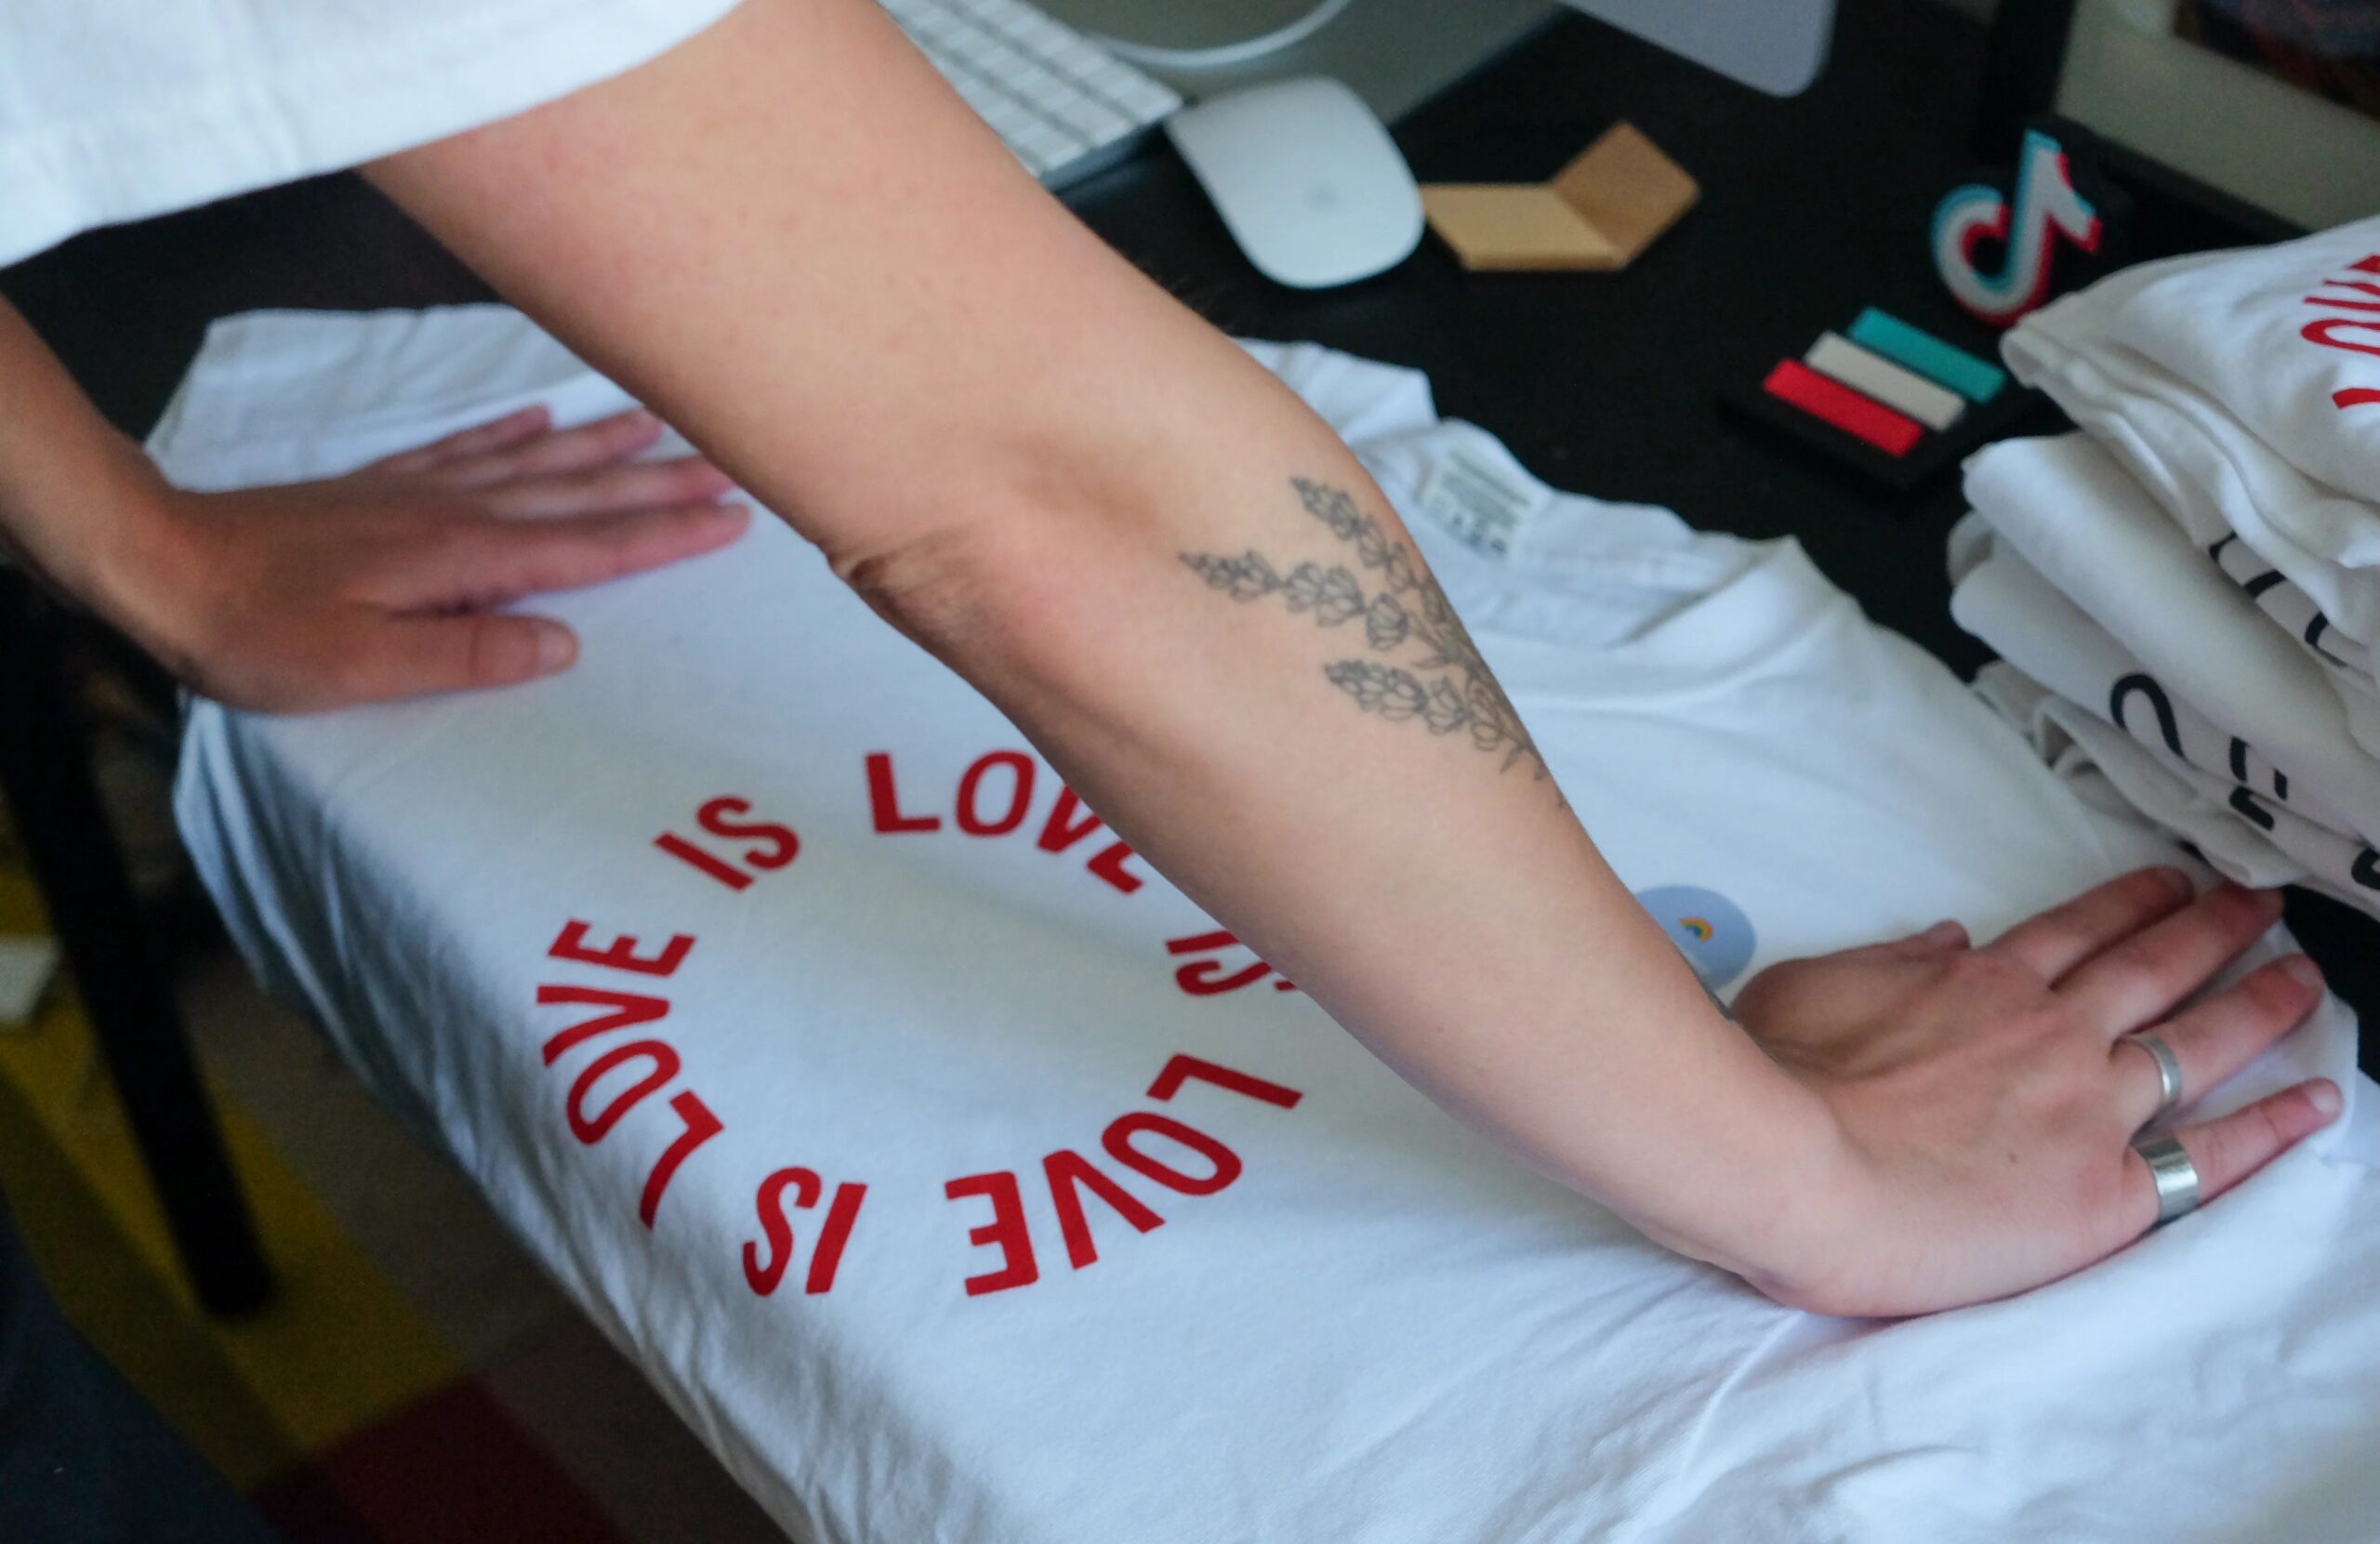 A person leans over a screenprinted tshirt